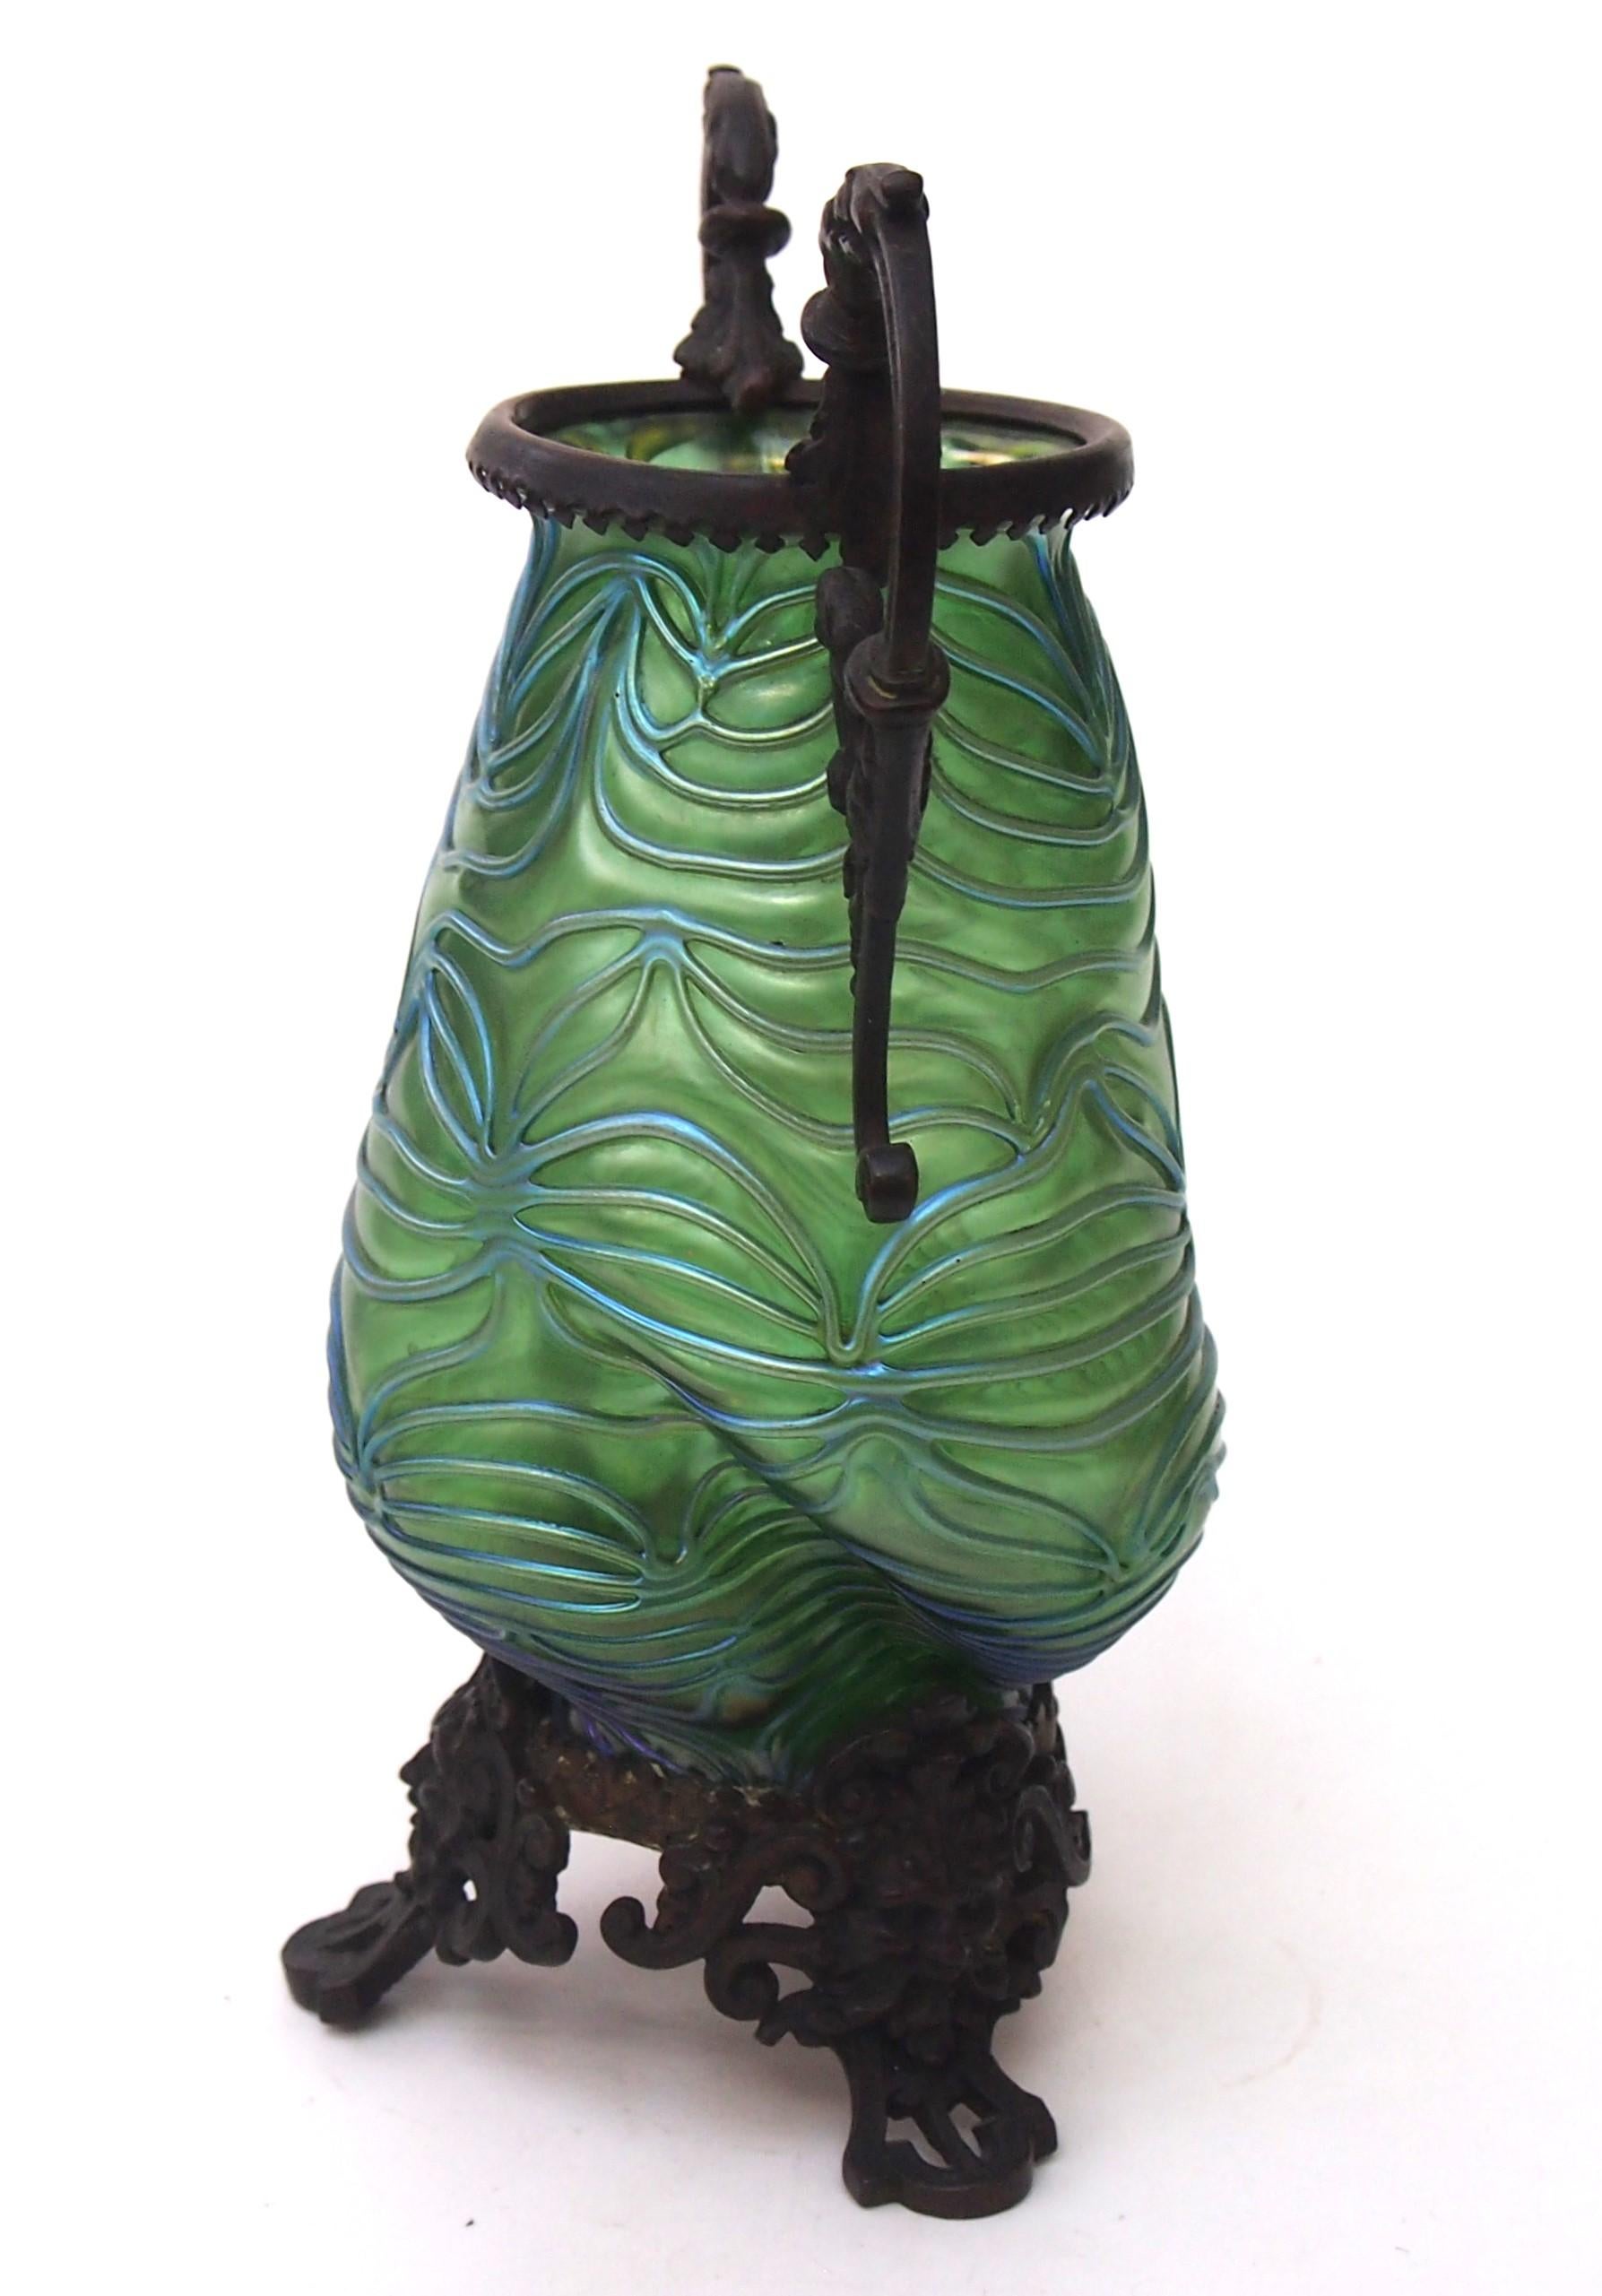 A Loetz Crete Formose wrythen gourd shaped vase in green with blue highlights an effect designed to look like waves -the vase has dramatic ornate metal handles attached to the top edge and an ornate metal base featuring three faces of Poseidon